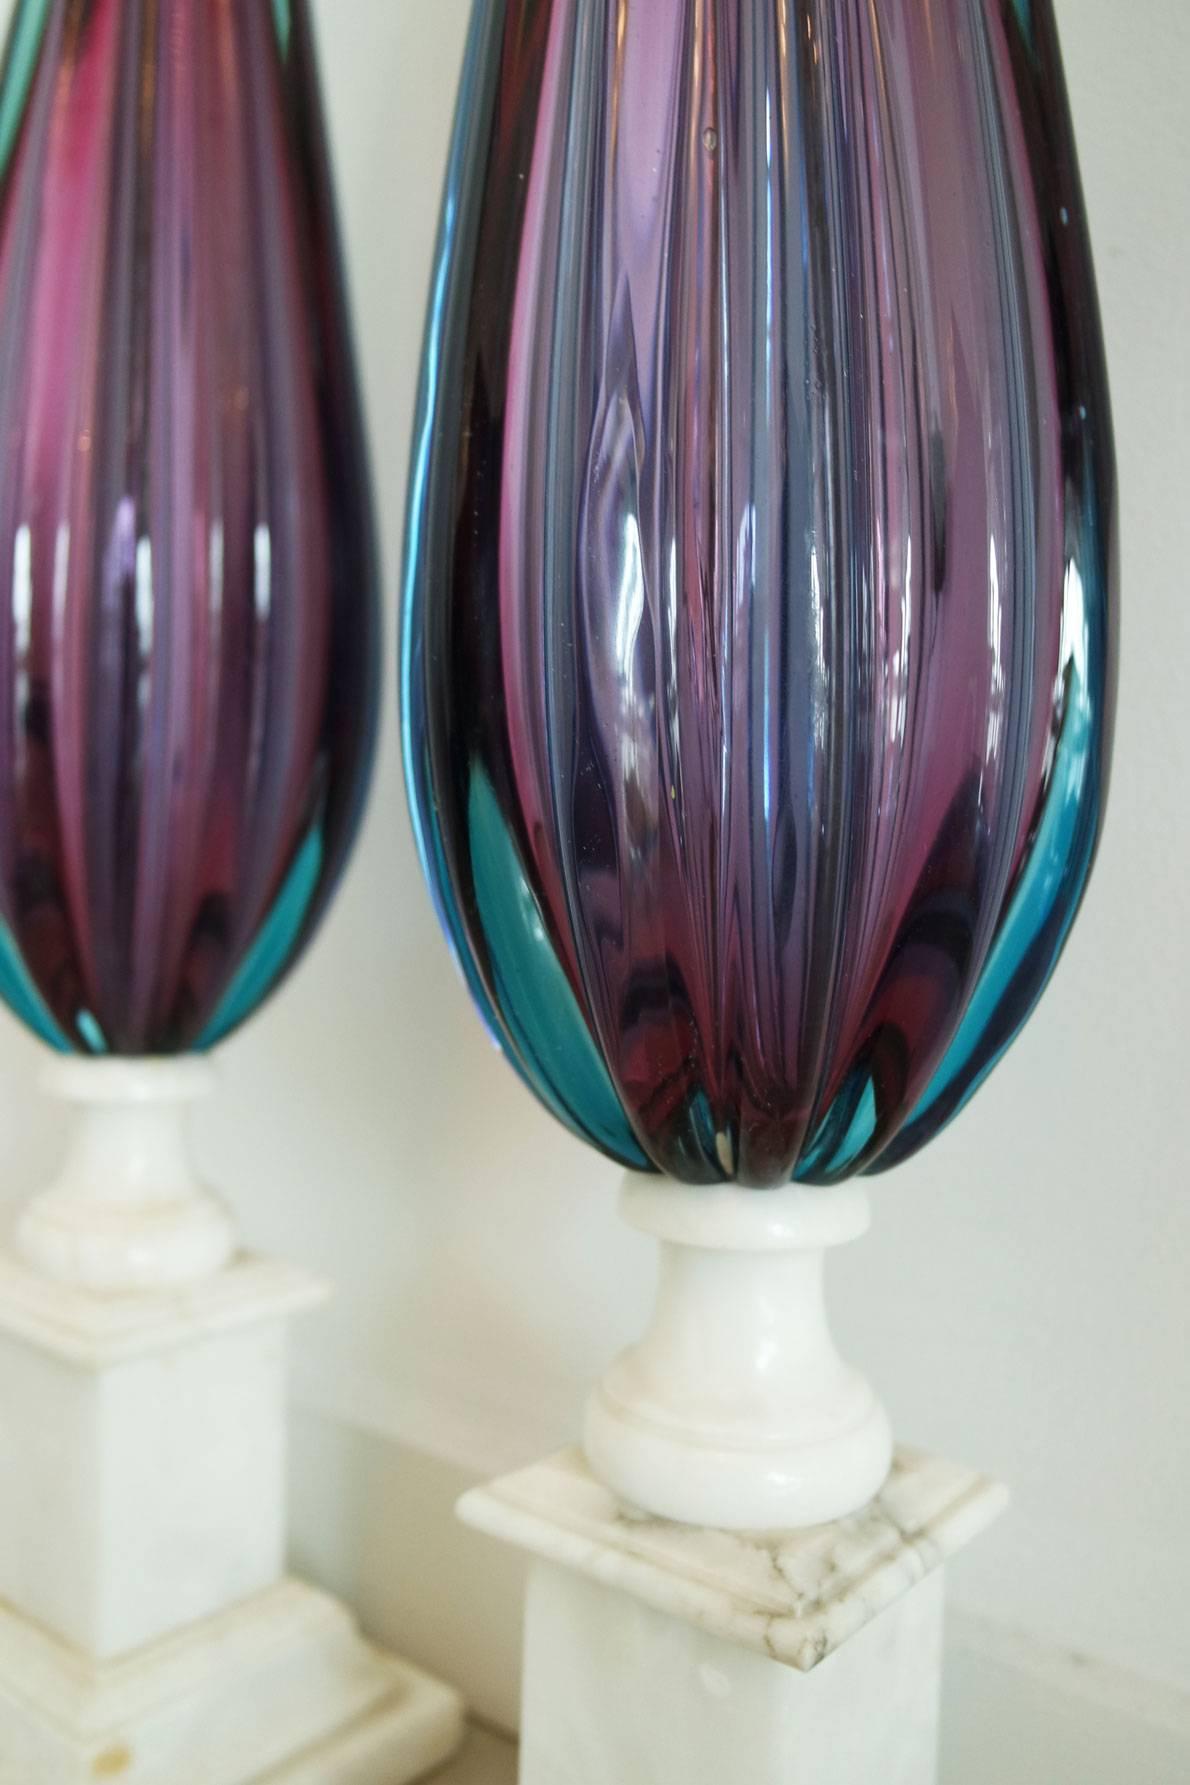 20th Century Pair of Purple and Teal Murano Glass Lamps on White Marble Bases For Sale